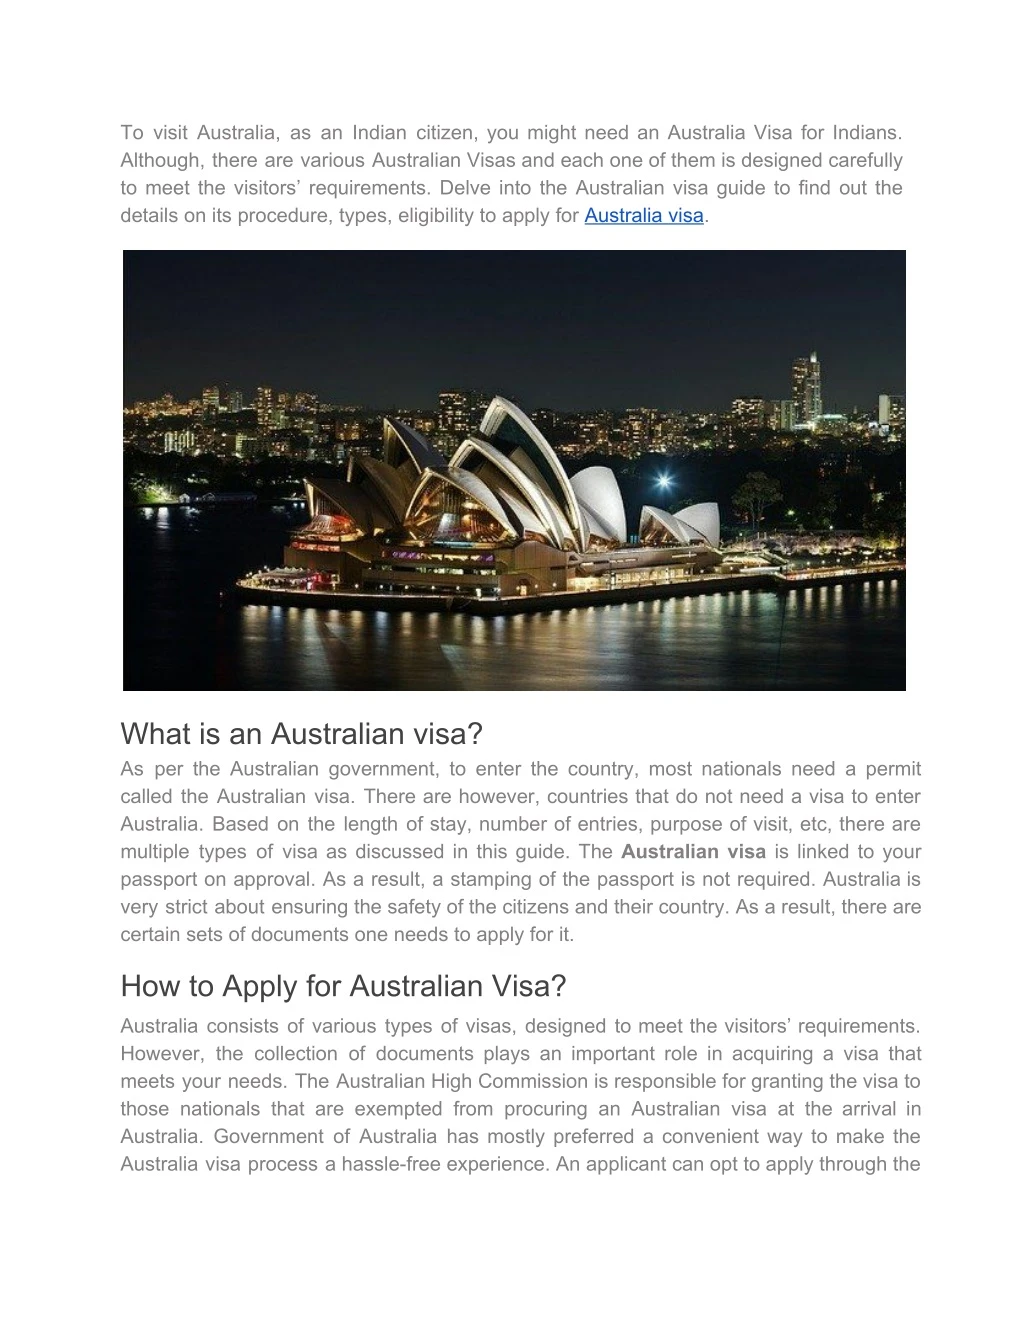 to visit australia as an indian citizen you might